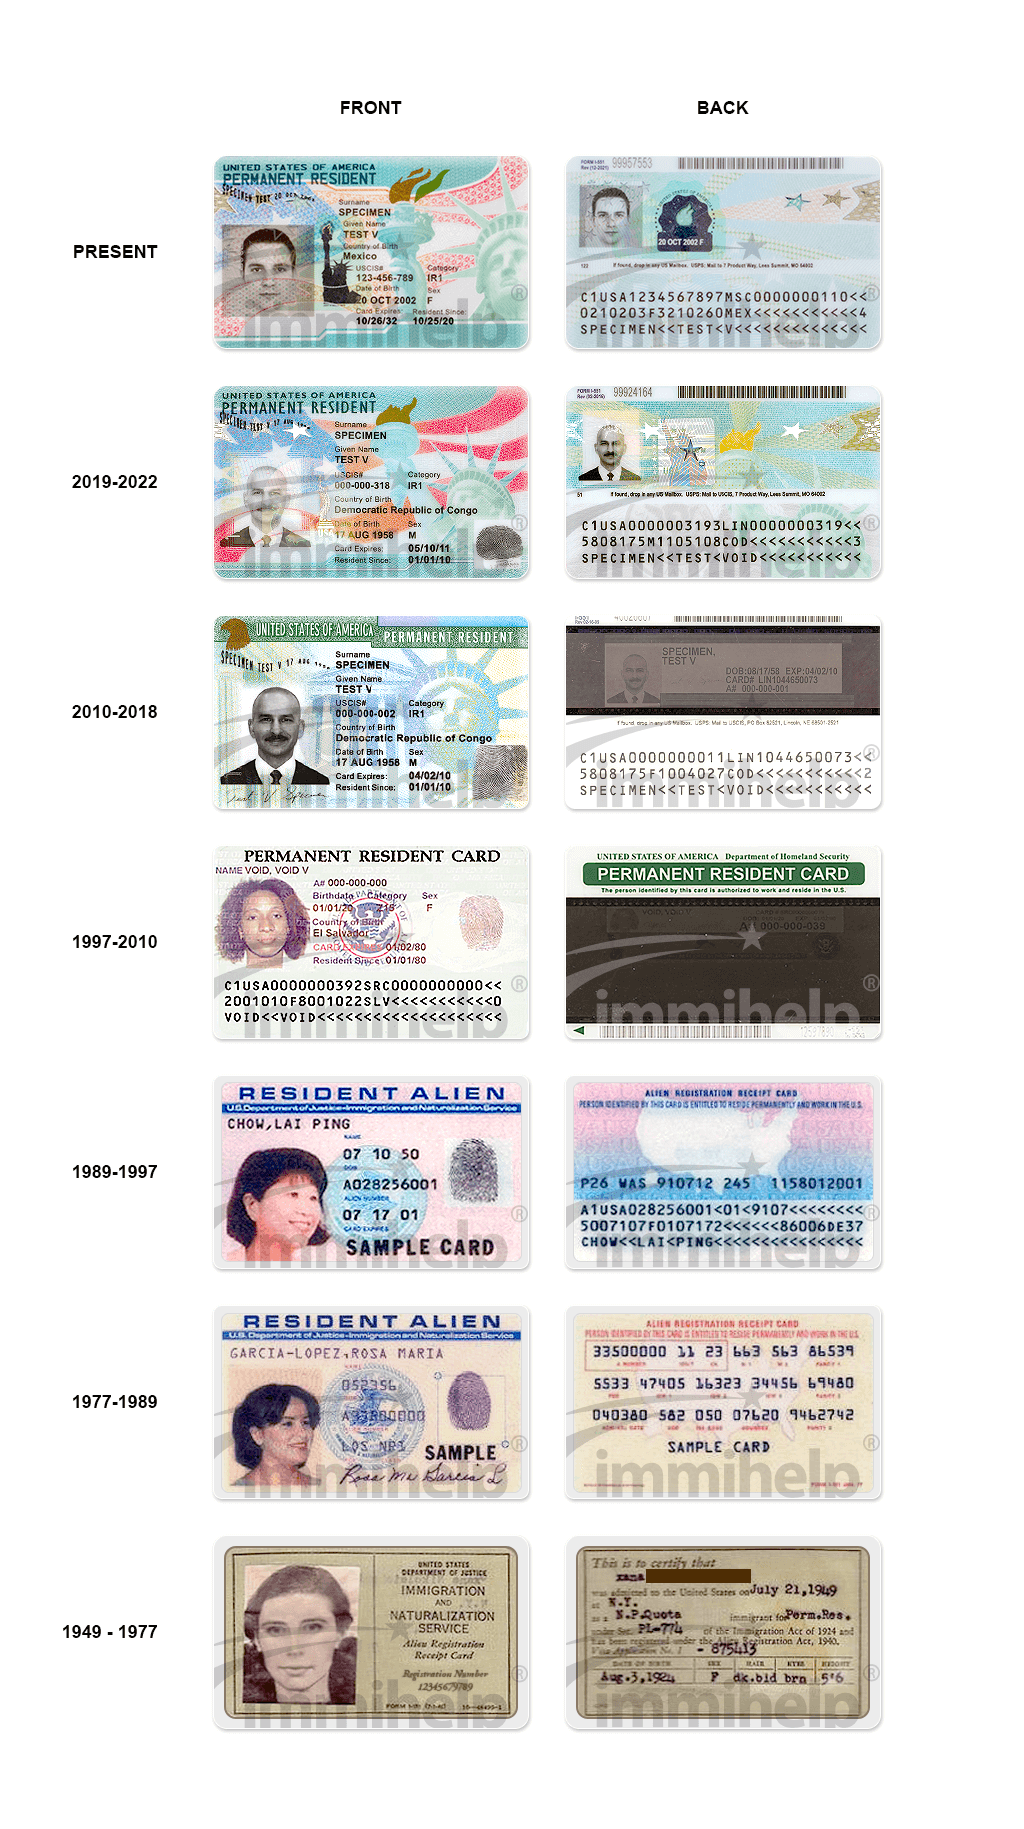 Different green card designs throughout the years